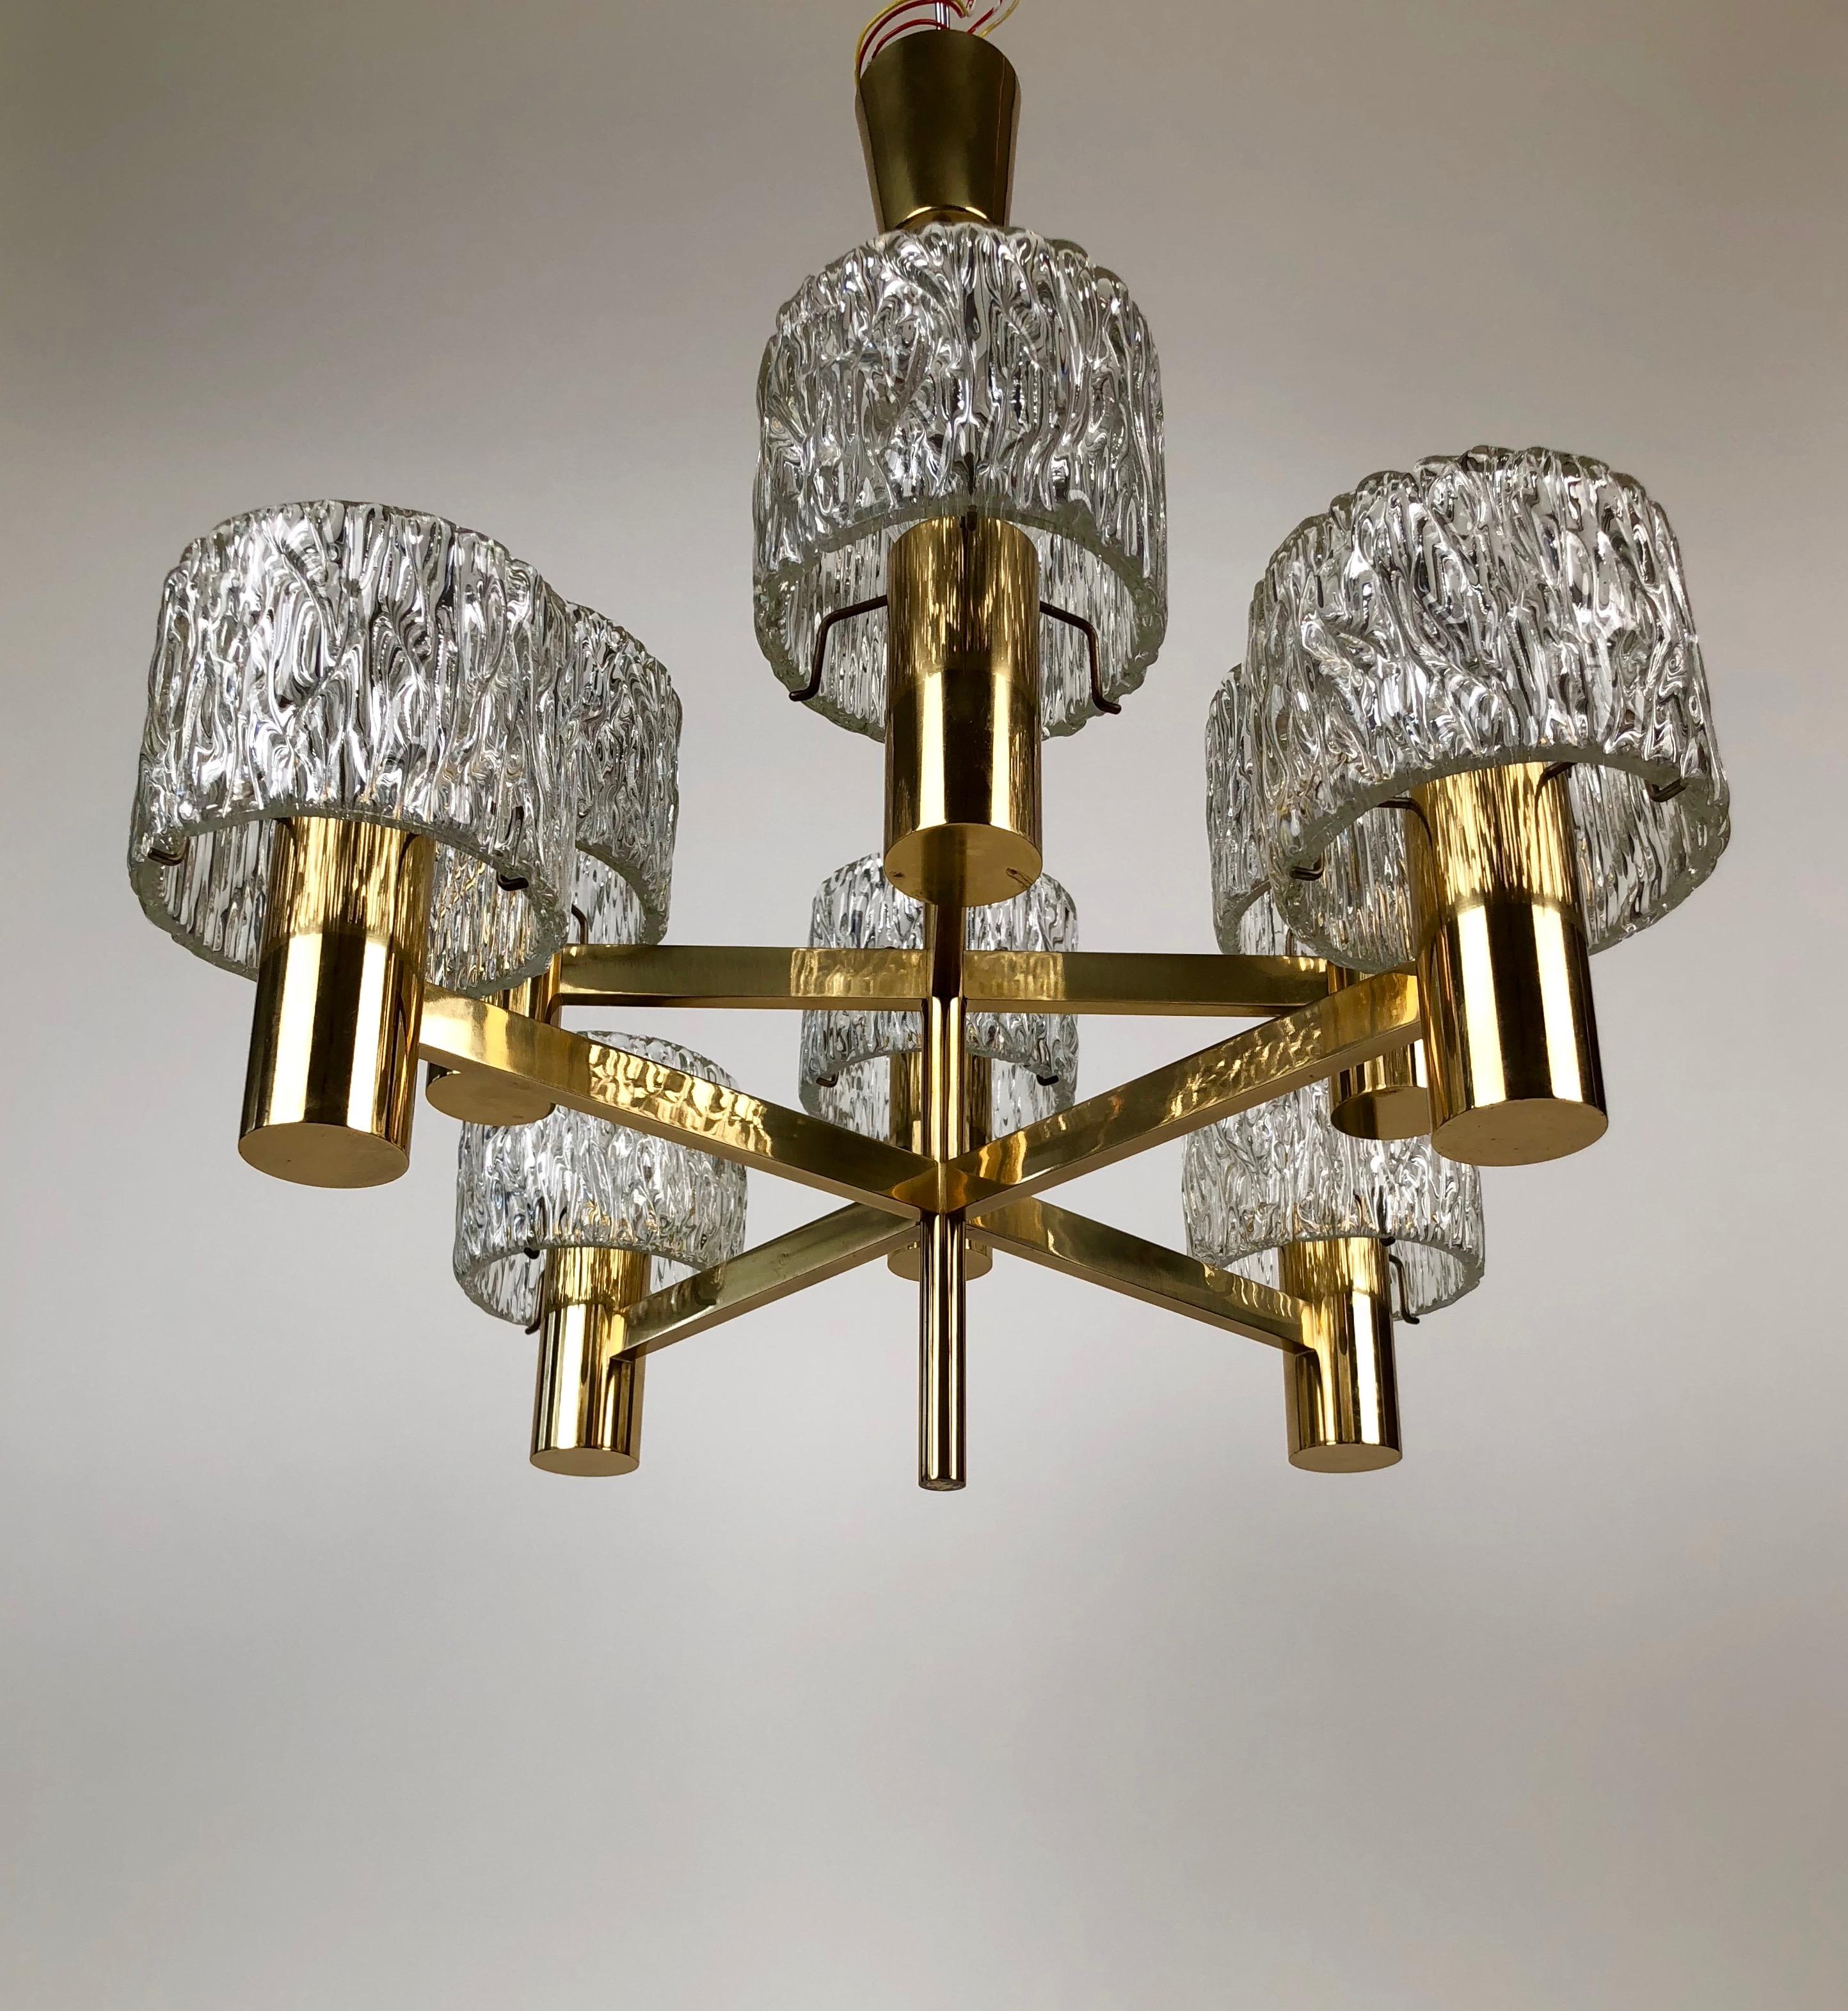 Chandelier made from the Austrian company J. T. Kalmar in the 60´s.
Solid brass construction with 8 arms and shades in massive lead glass.
The lamp is in a very fine condition.